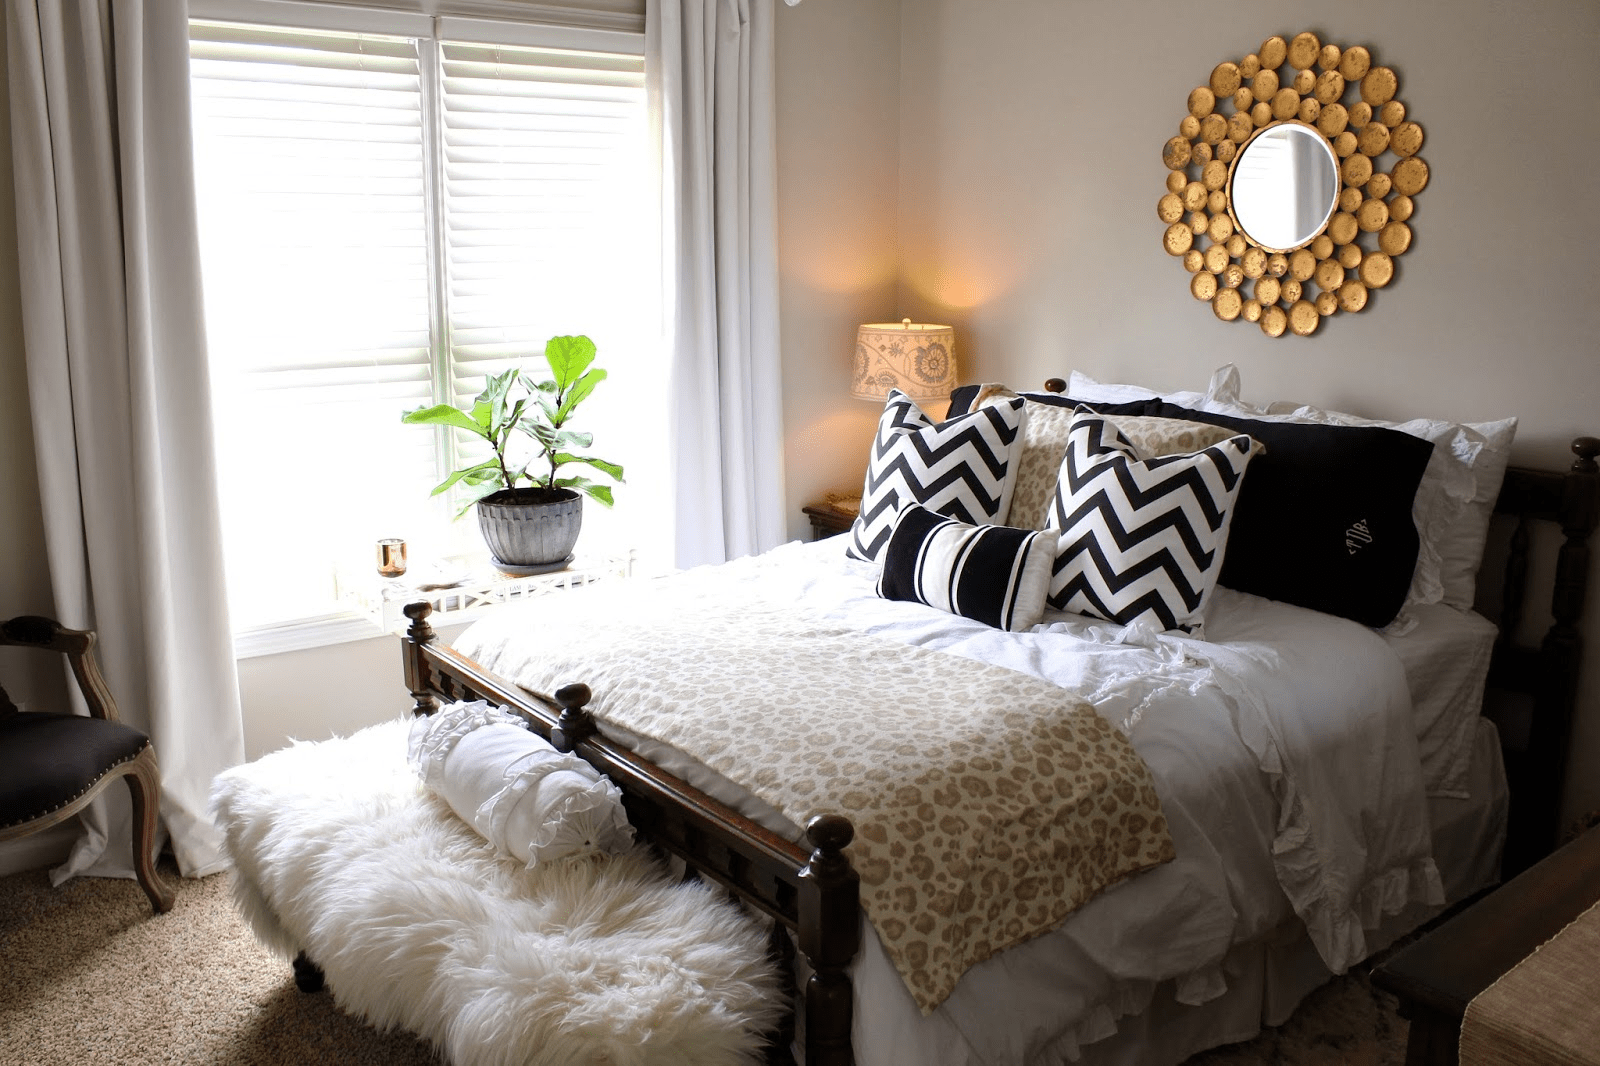 How to Decorate Guest Bedroom On Your Own - EasyHomeTips.org